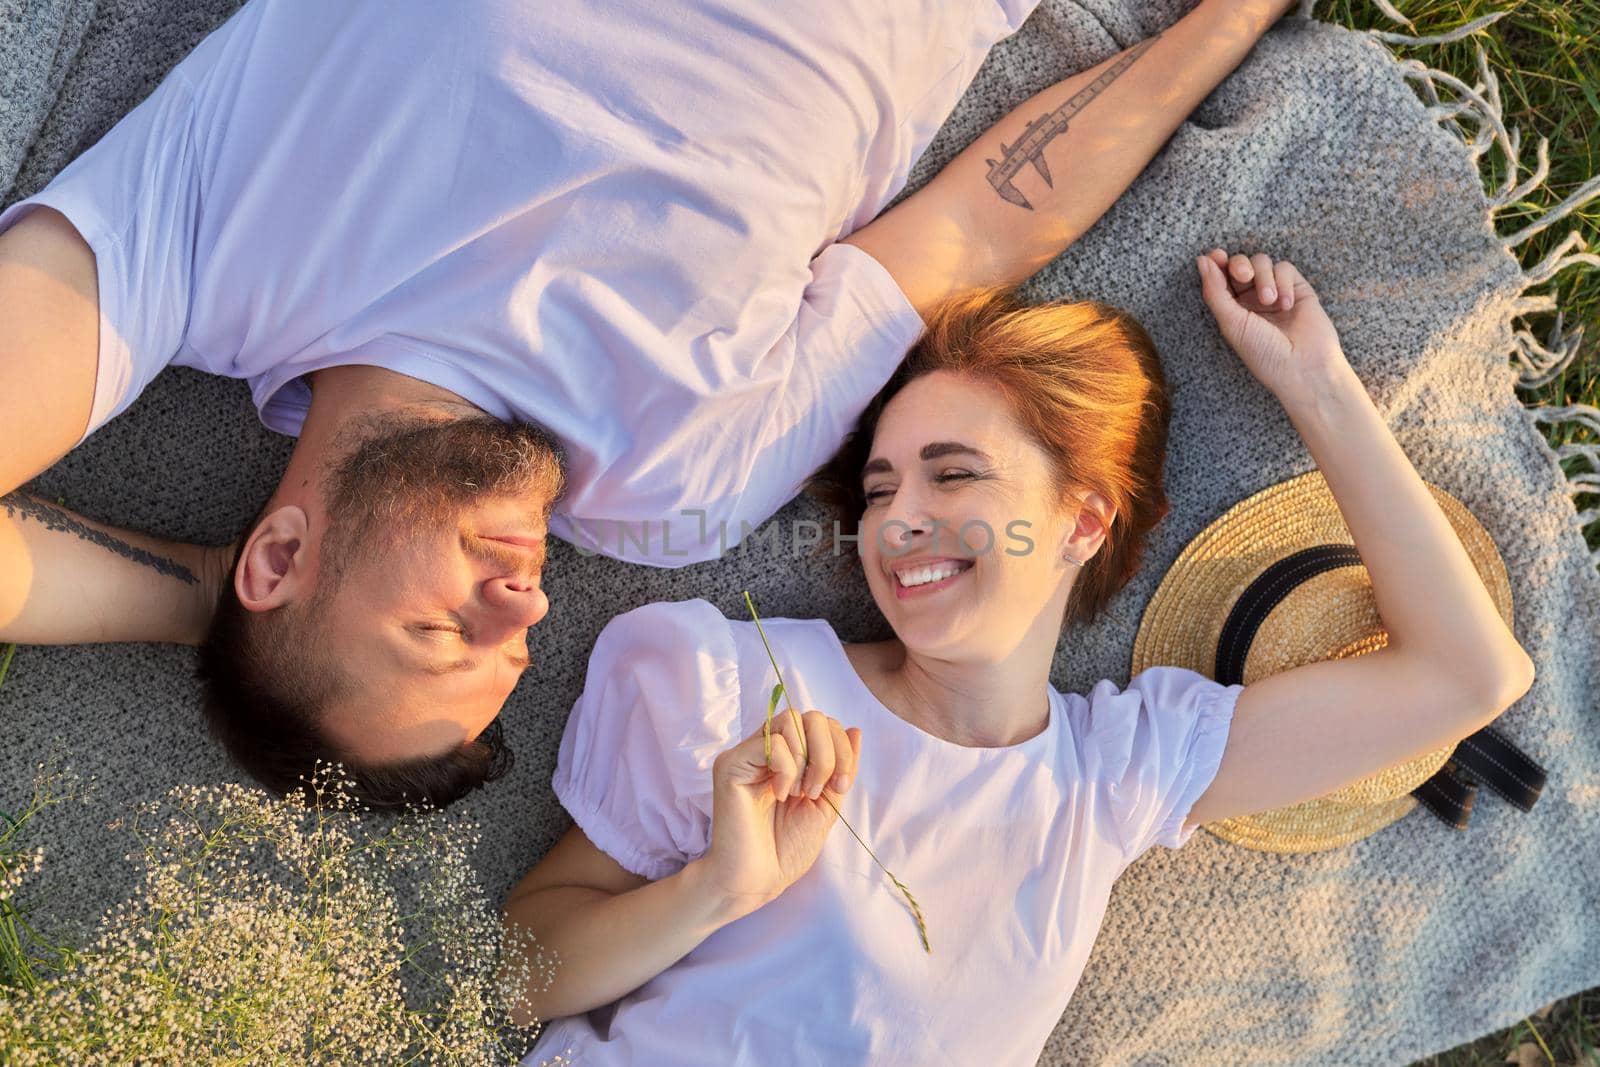 Portrait of beautiful happy couple in 30s 40s. Top view of smiling faces of man and woman lying together in sunset sunlight. Middle-aged people in love, relationship, relaxation, happiness, lifestyle